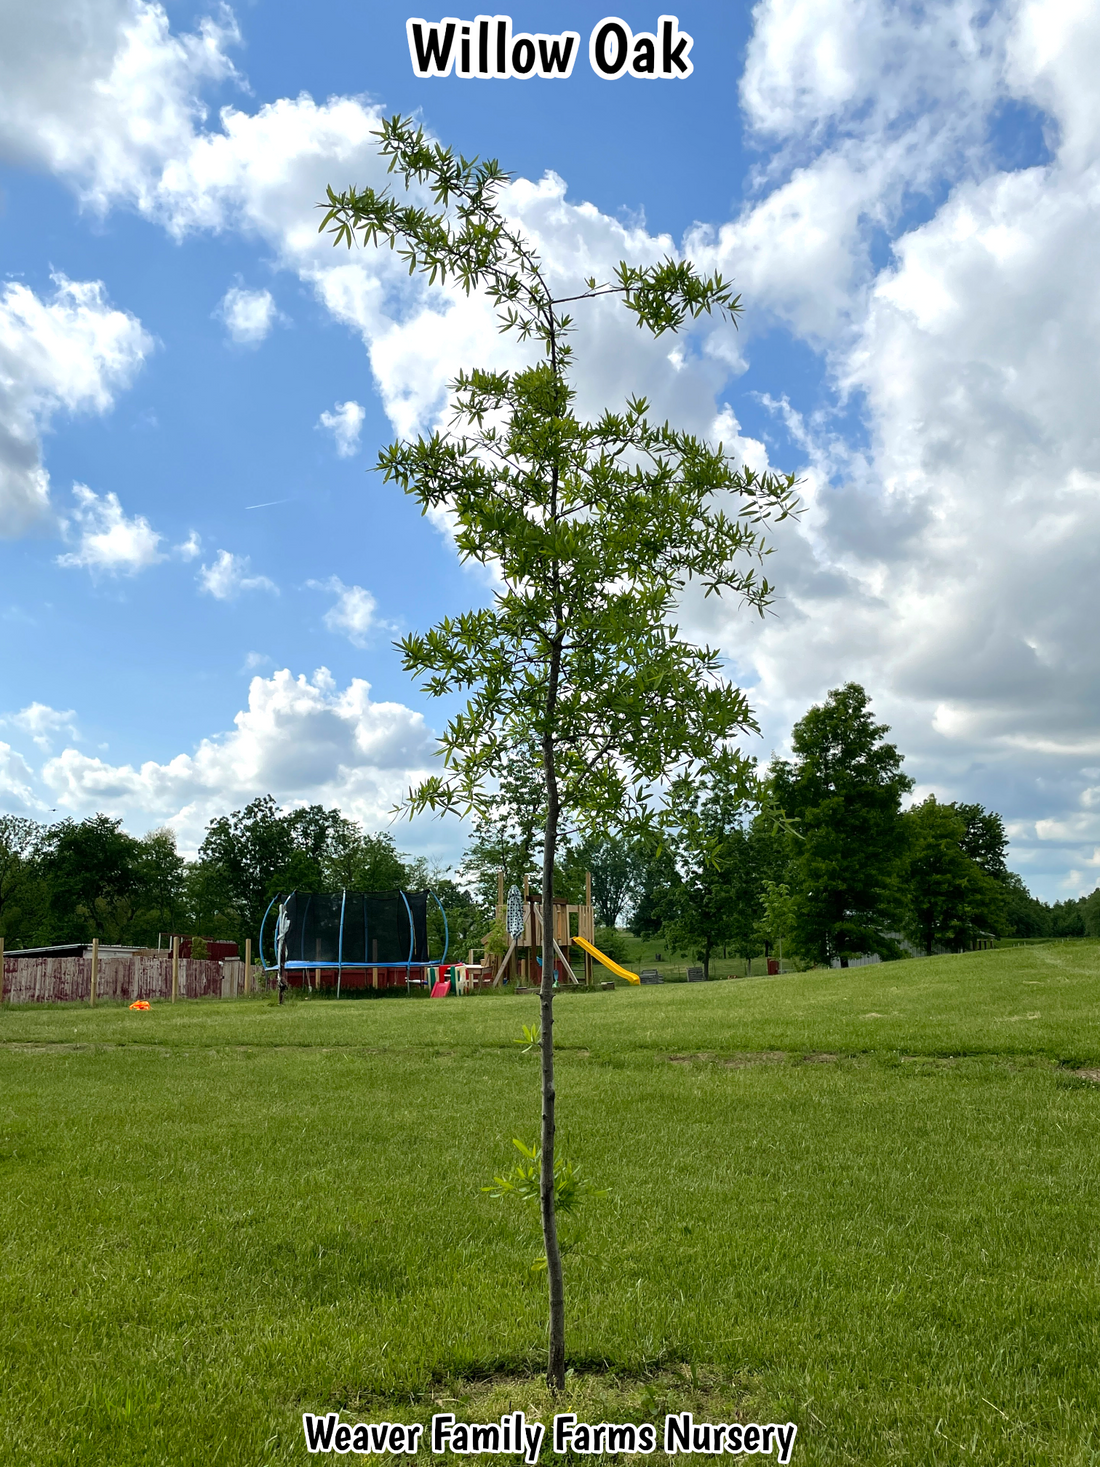 What Does A Willow Oak Tree Look Like?